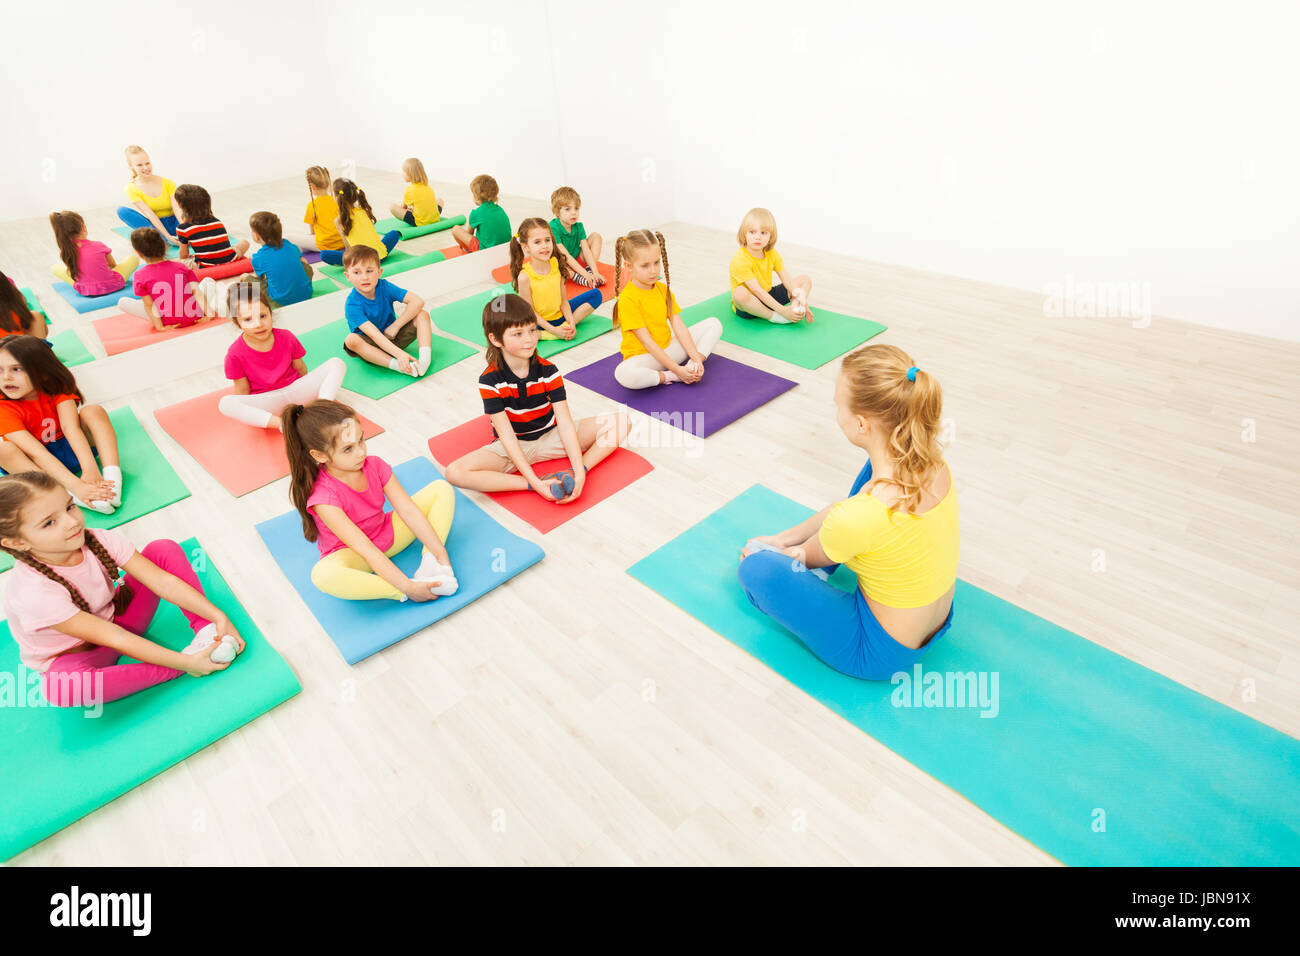 Group of sporty kids sitting on yoga mats and doing butterfly stretch with female instructor in exercise room Stock Photo